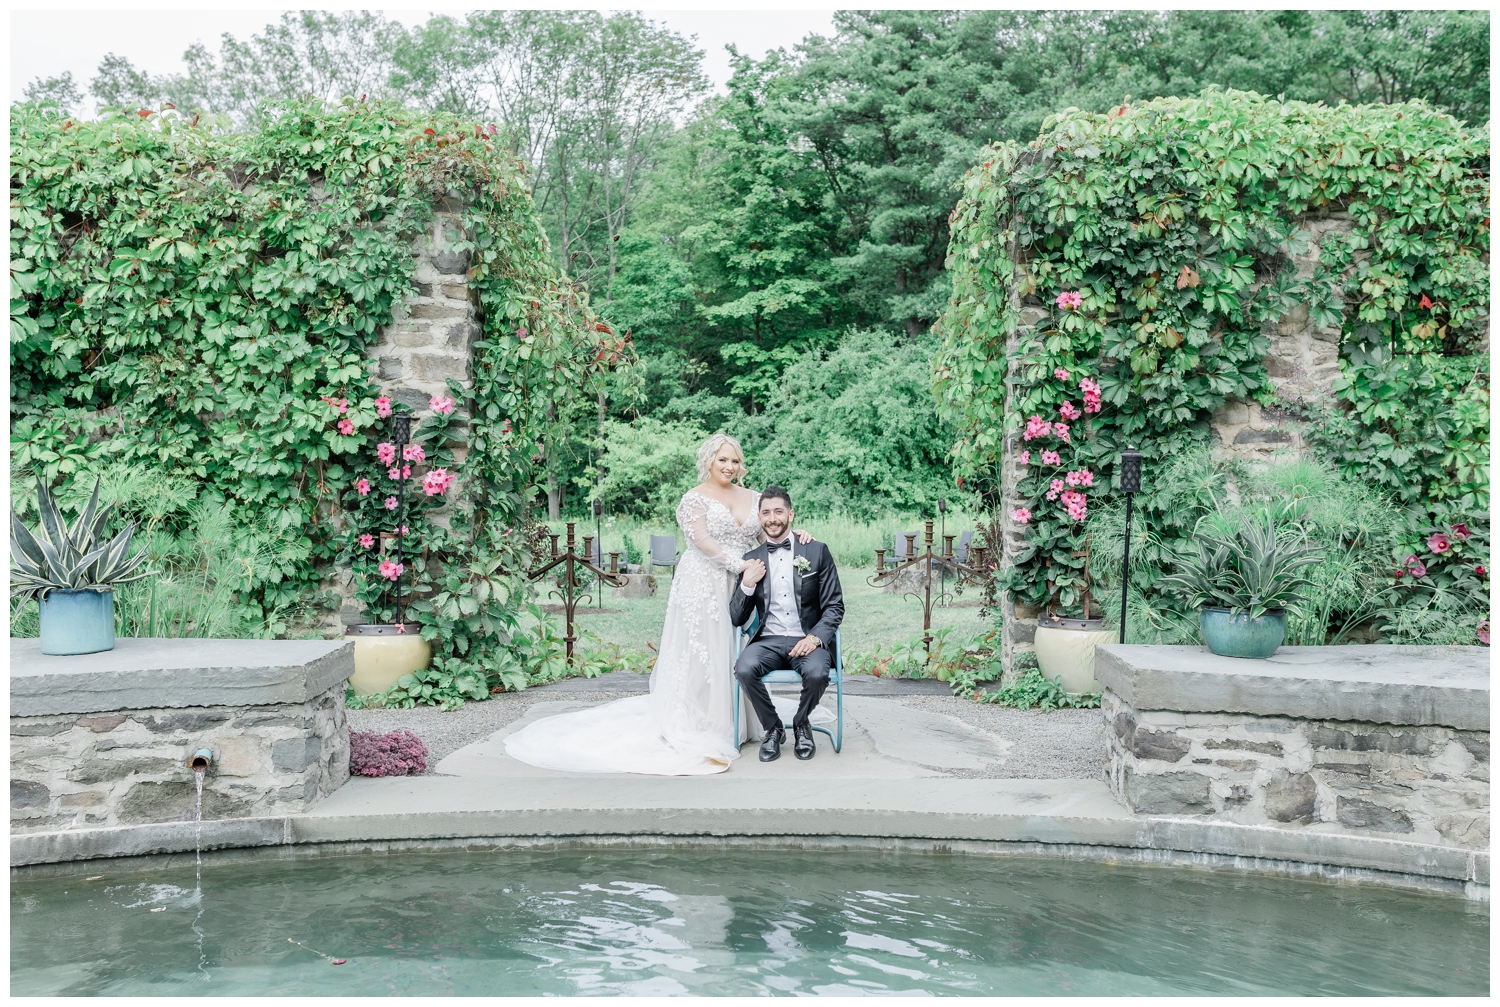 Classic and timeless photo of a groom sitting with his bride standing next to him in the middle of a garden in front of a pool. Their intimate wedding was celebrated at an outdoor venue near Ithaca, NY called The Treman Center. These images were photographed and edited in a light and airy style by Nicole Weeks Photography who is located in Albany, NY.
